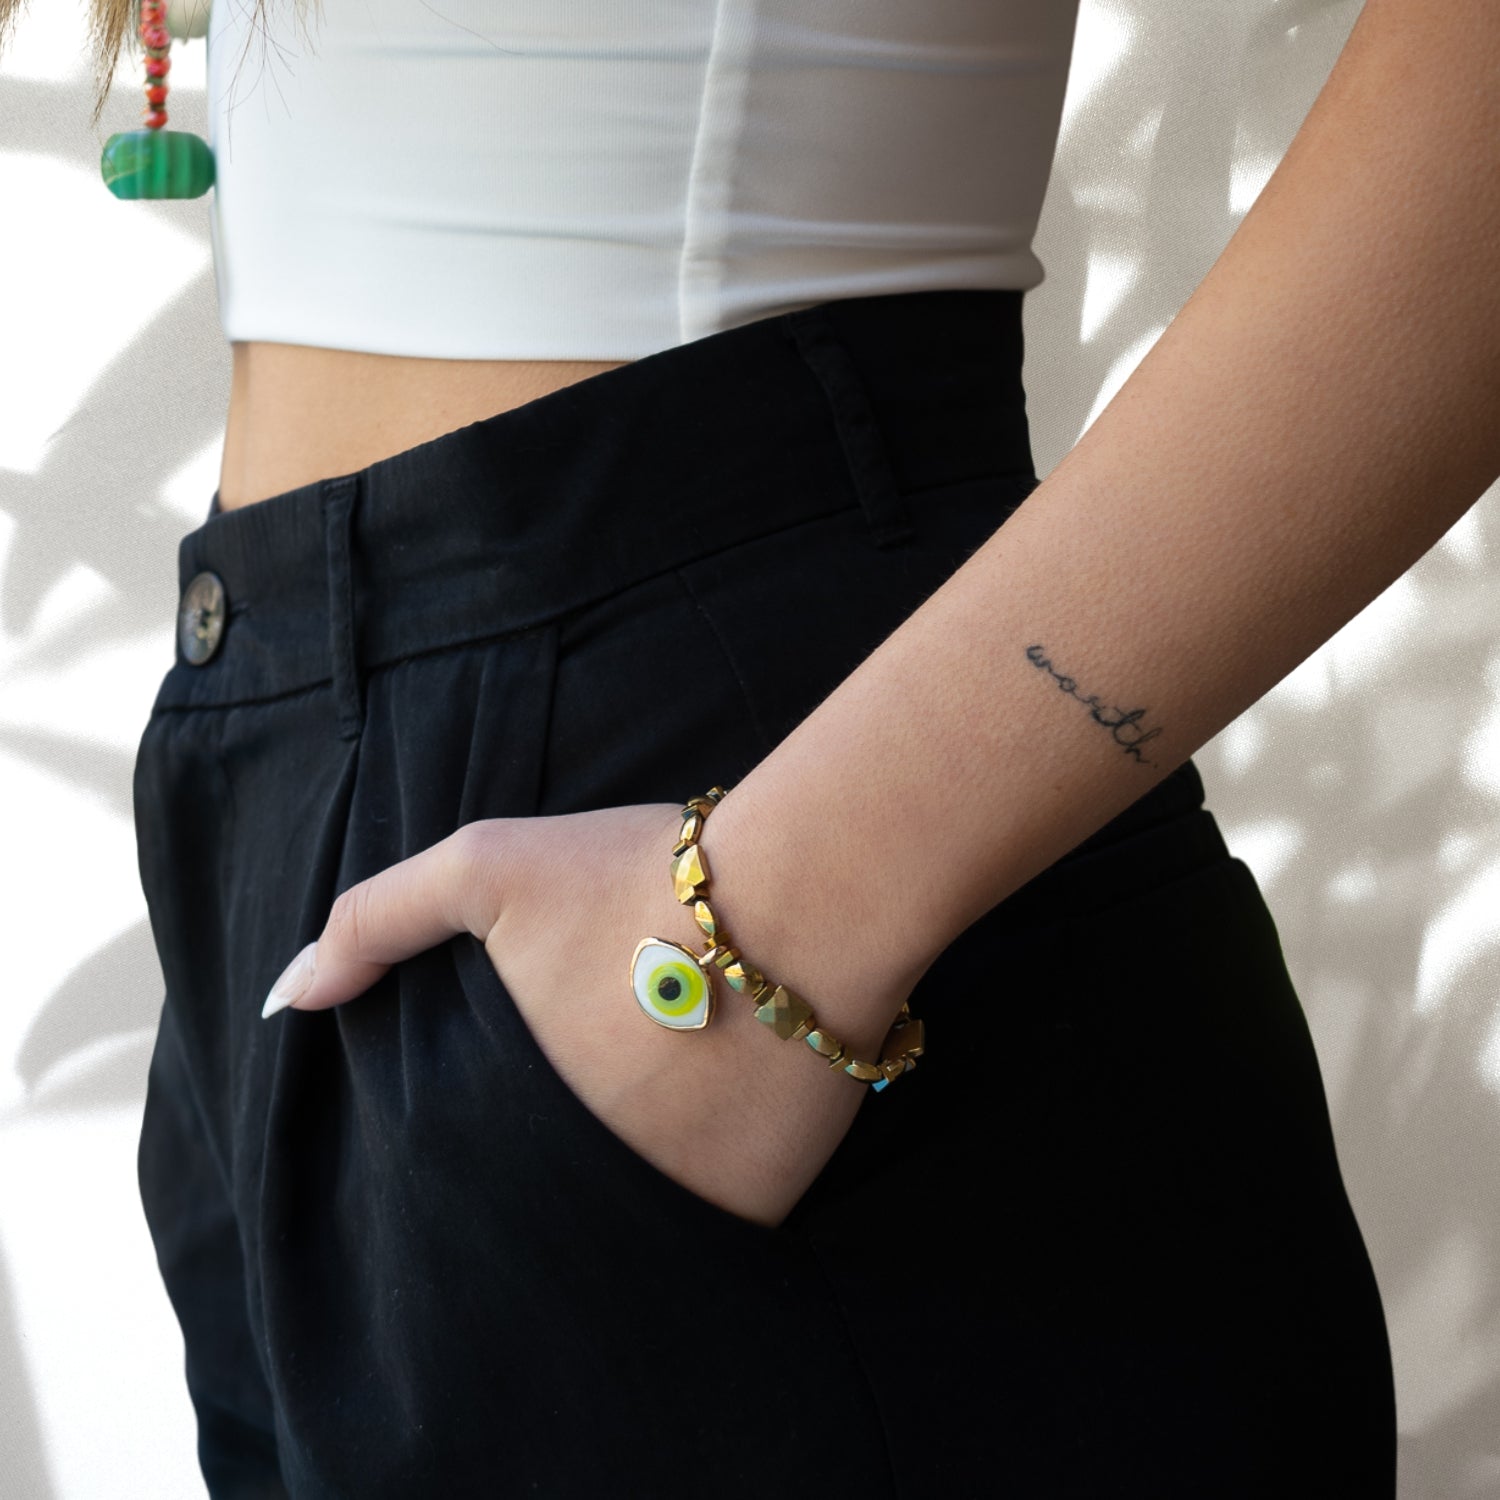 A hand model wearing the Green Eye Vitality Bracelet, showcasing its stunning design and vibrant green Evil eye charm. The bracelet adds a stylish touch to the model's wrist, exuding elegance and positive energy.